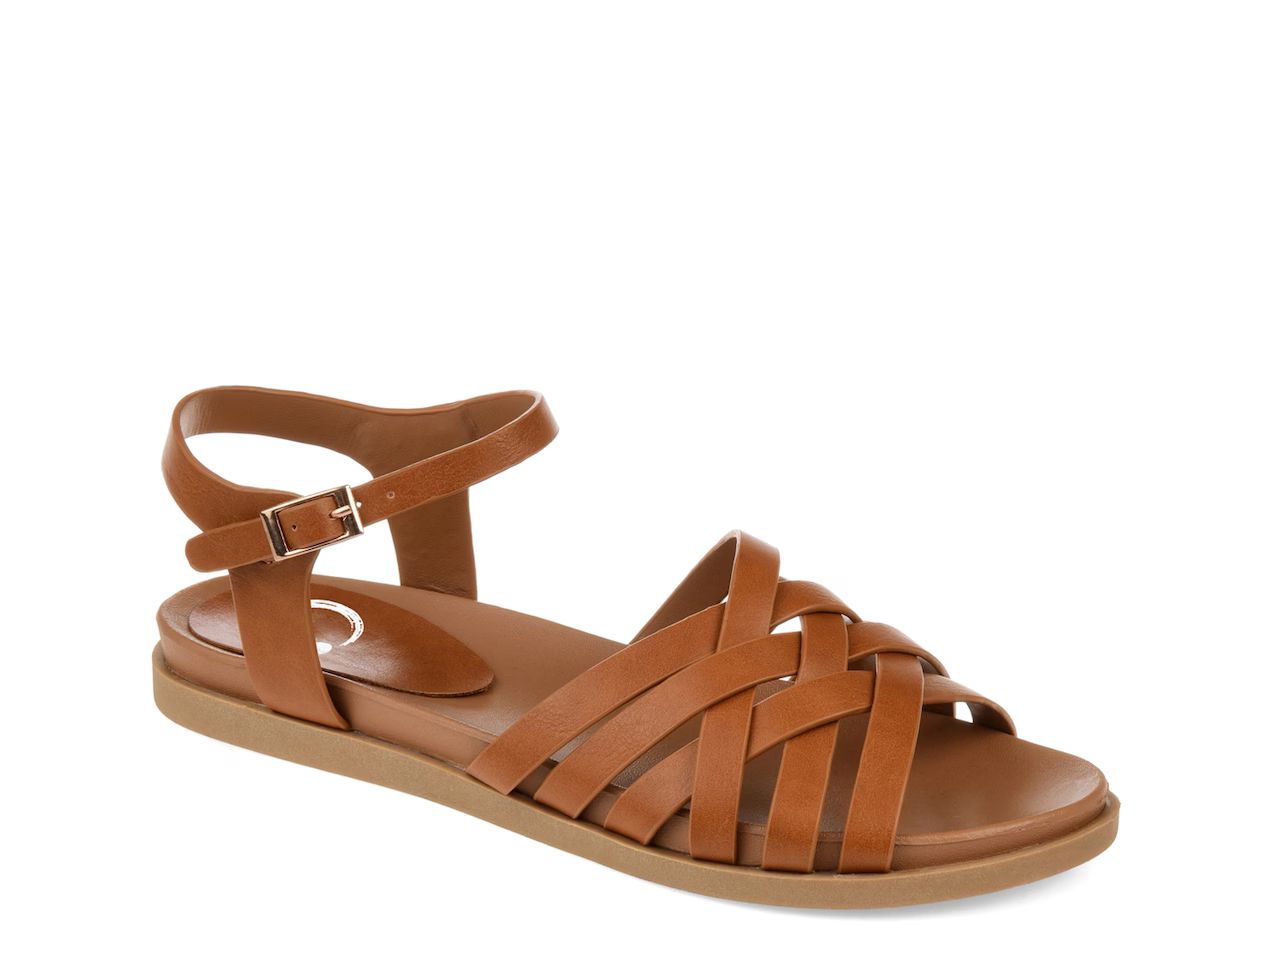 Journee Collection Kimmie Sandal | DSW